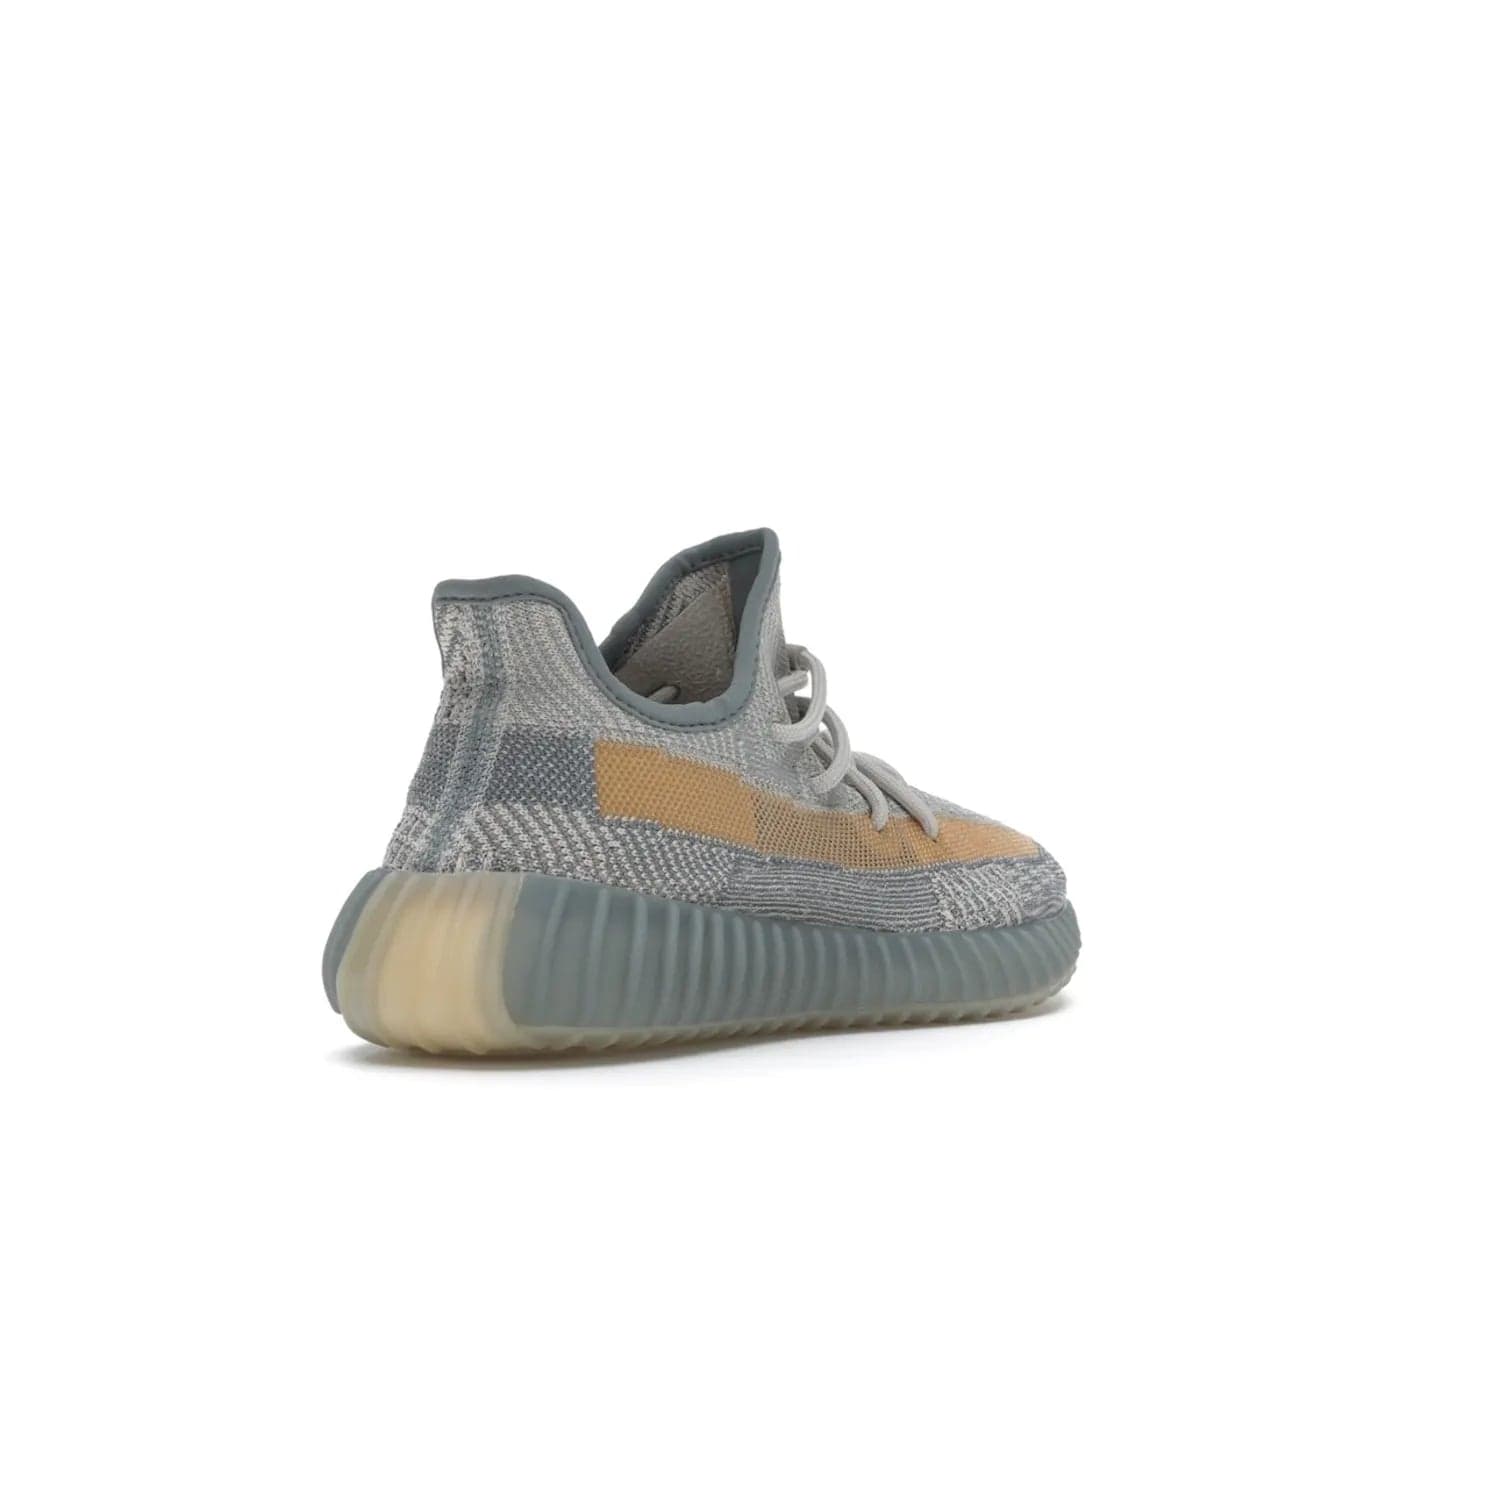 adidas Yeezy Boost 350 V2 Israfil - Image 32 - Only at www.BallersClubKickz.com - The adidas Yeezy Boost 350 V2 Israfil provides a unique style with a triple colorway and multi-colored threads. Featuring BOOST cushioning in a translucent midsole, this must-have sneaker drops in August 2020.